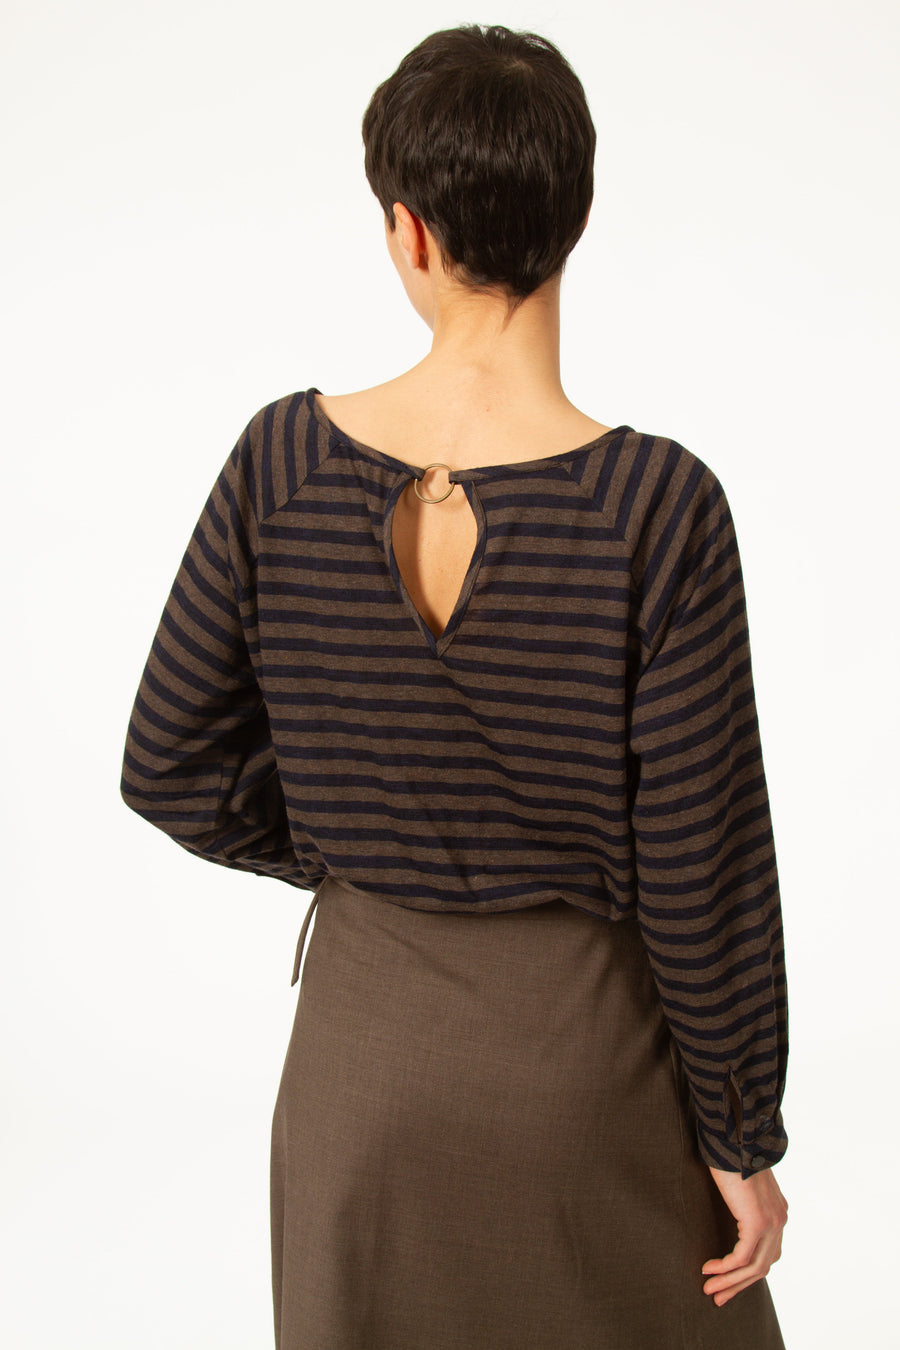 LUCIEN Striped Top